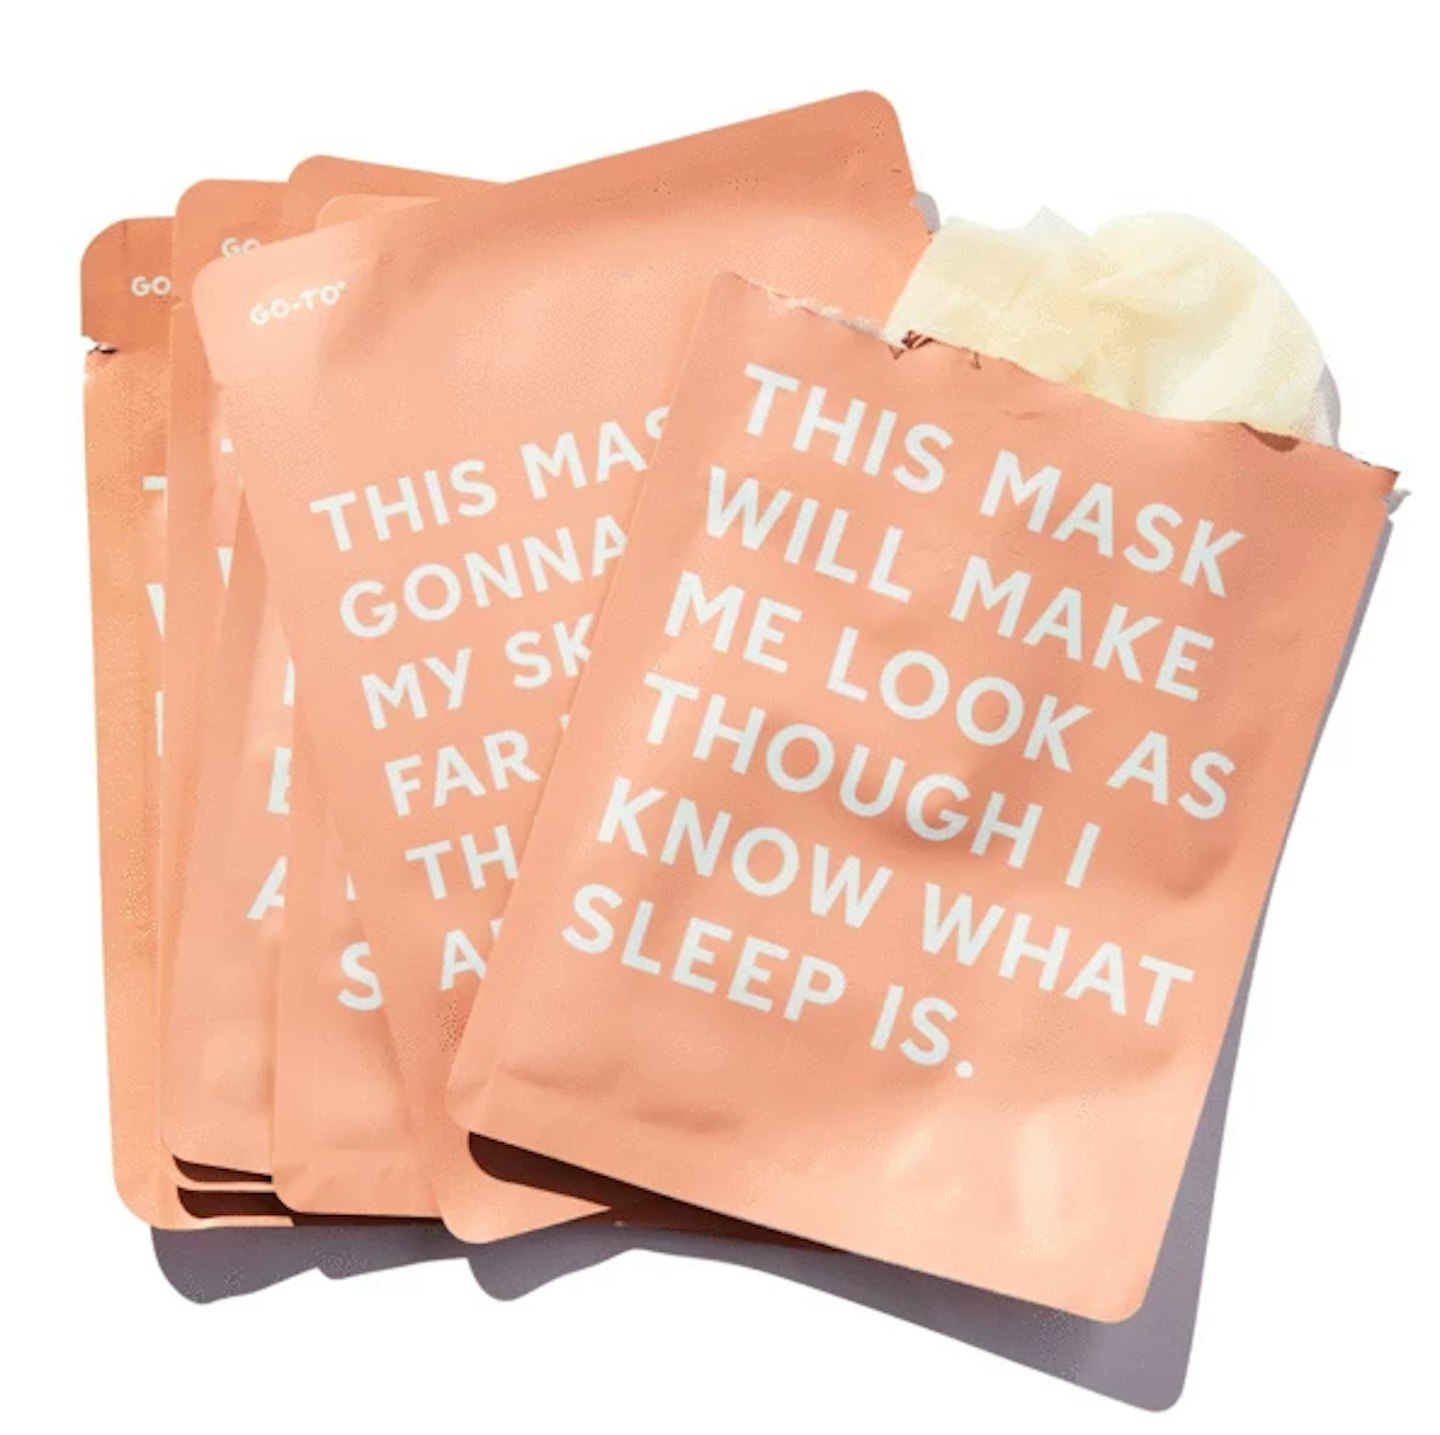 go-to sheet mask